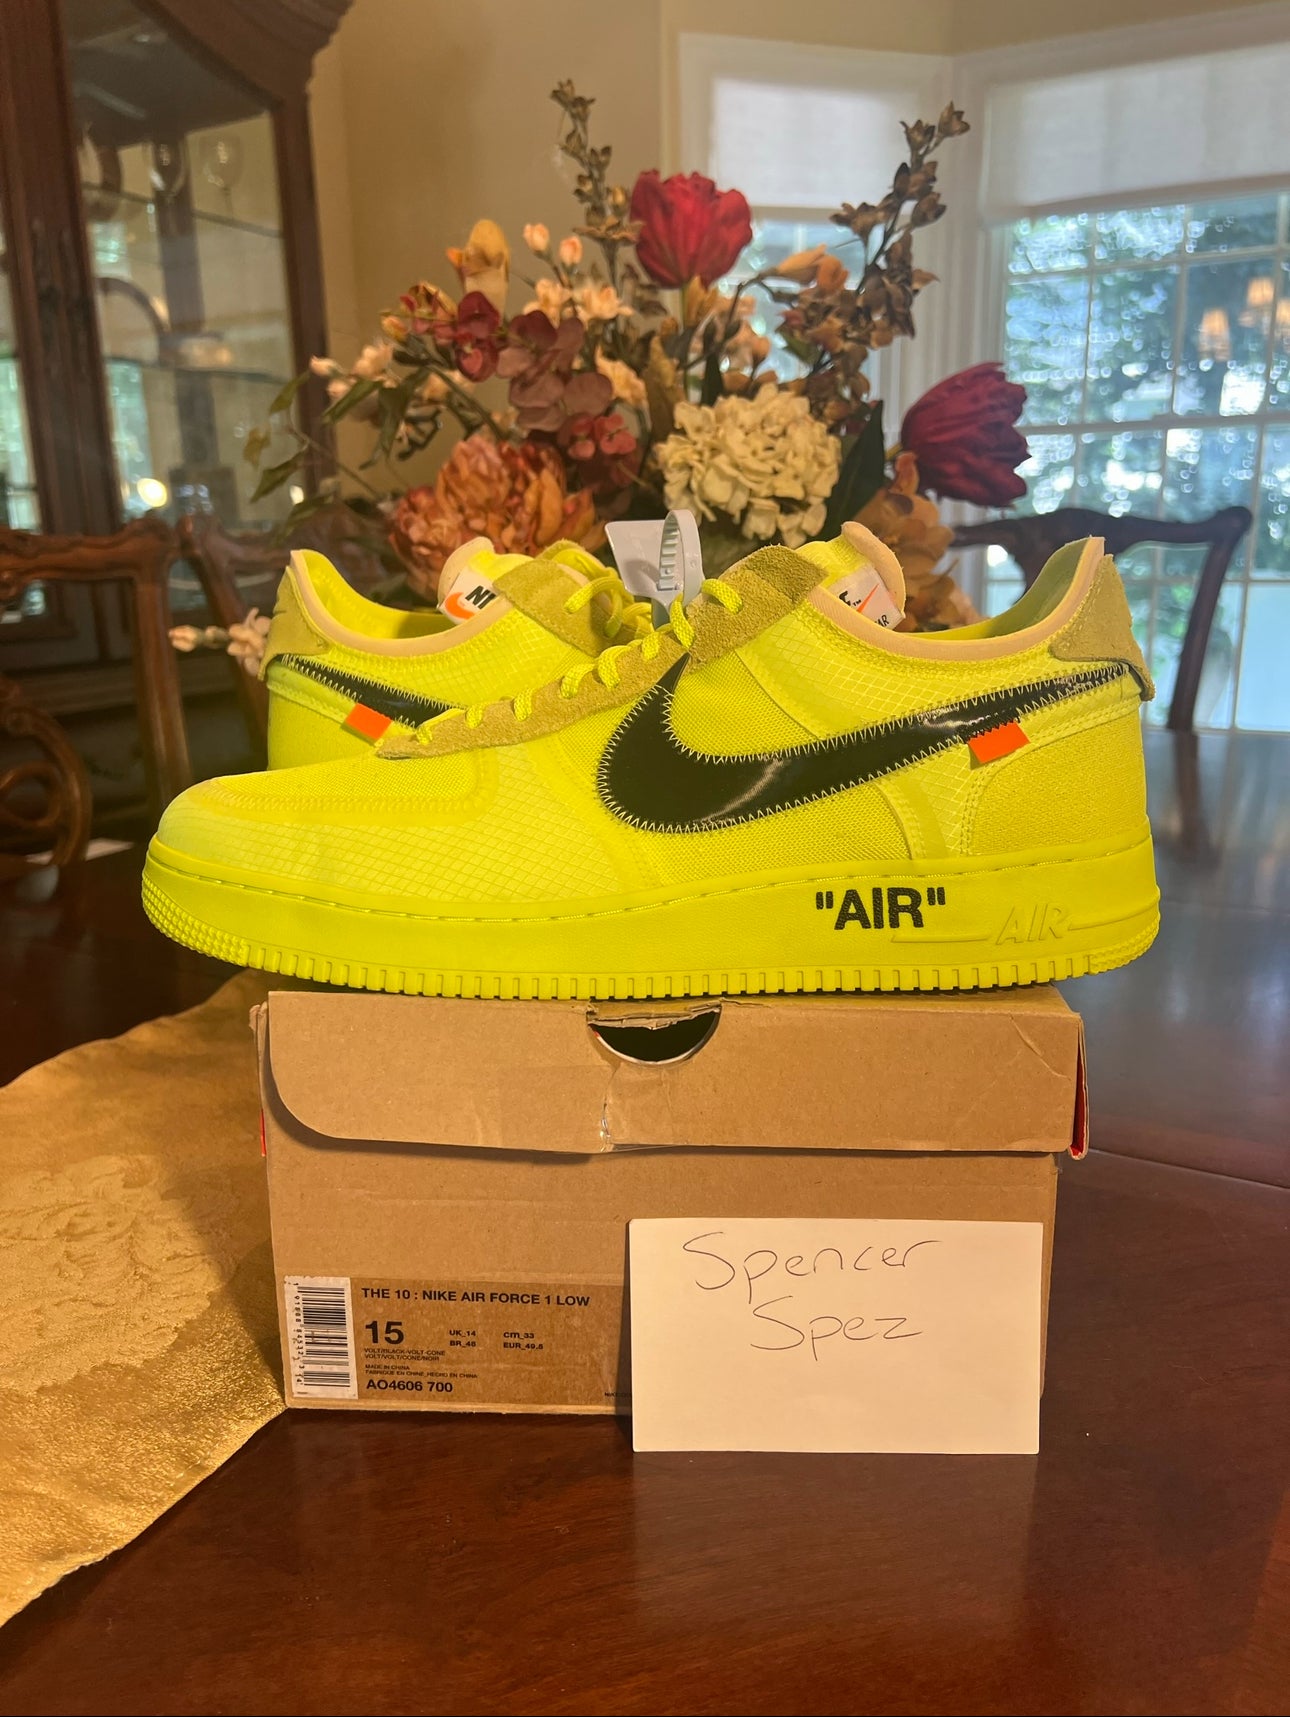 Air force 1 Low Off-White Volt